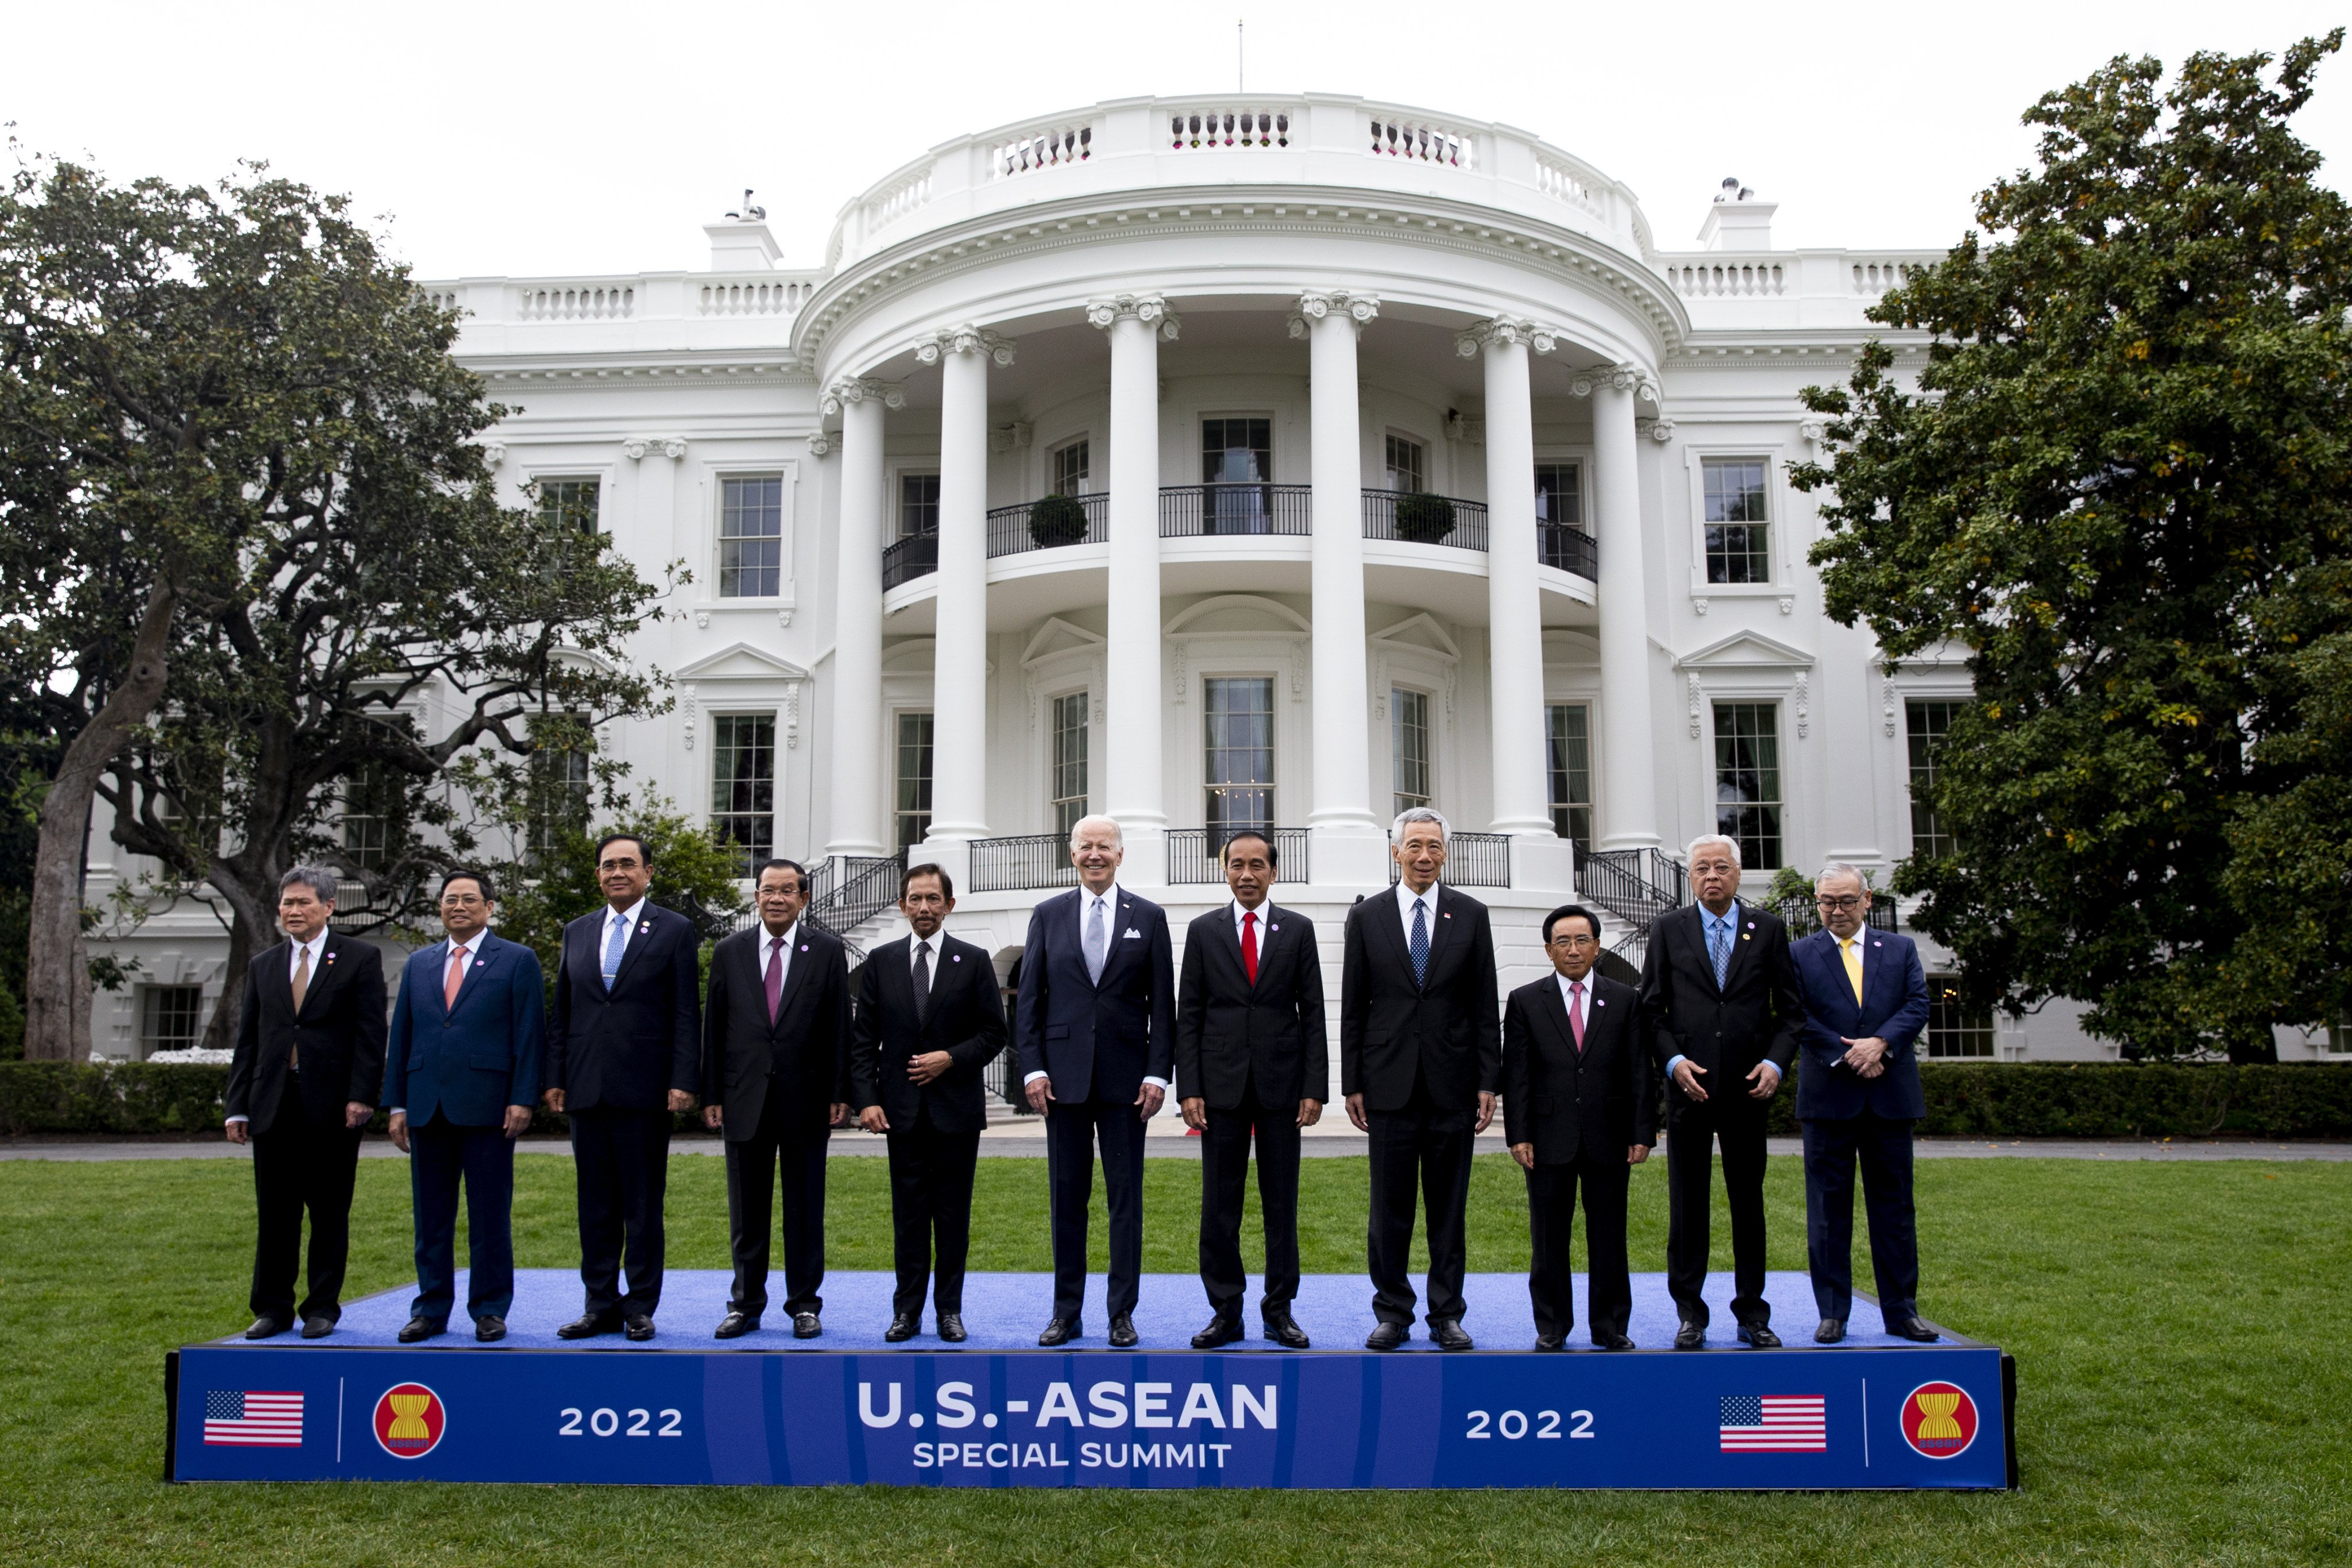 US President Joe Biden (centre) gathers with leaders of Association of Southeast Asian Nations countries for a photo on the South Lawn of the White House in Washington on May 12. Photo: Bloomberg